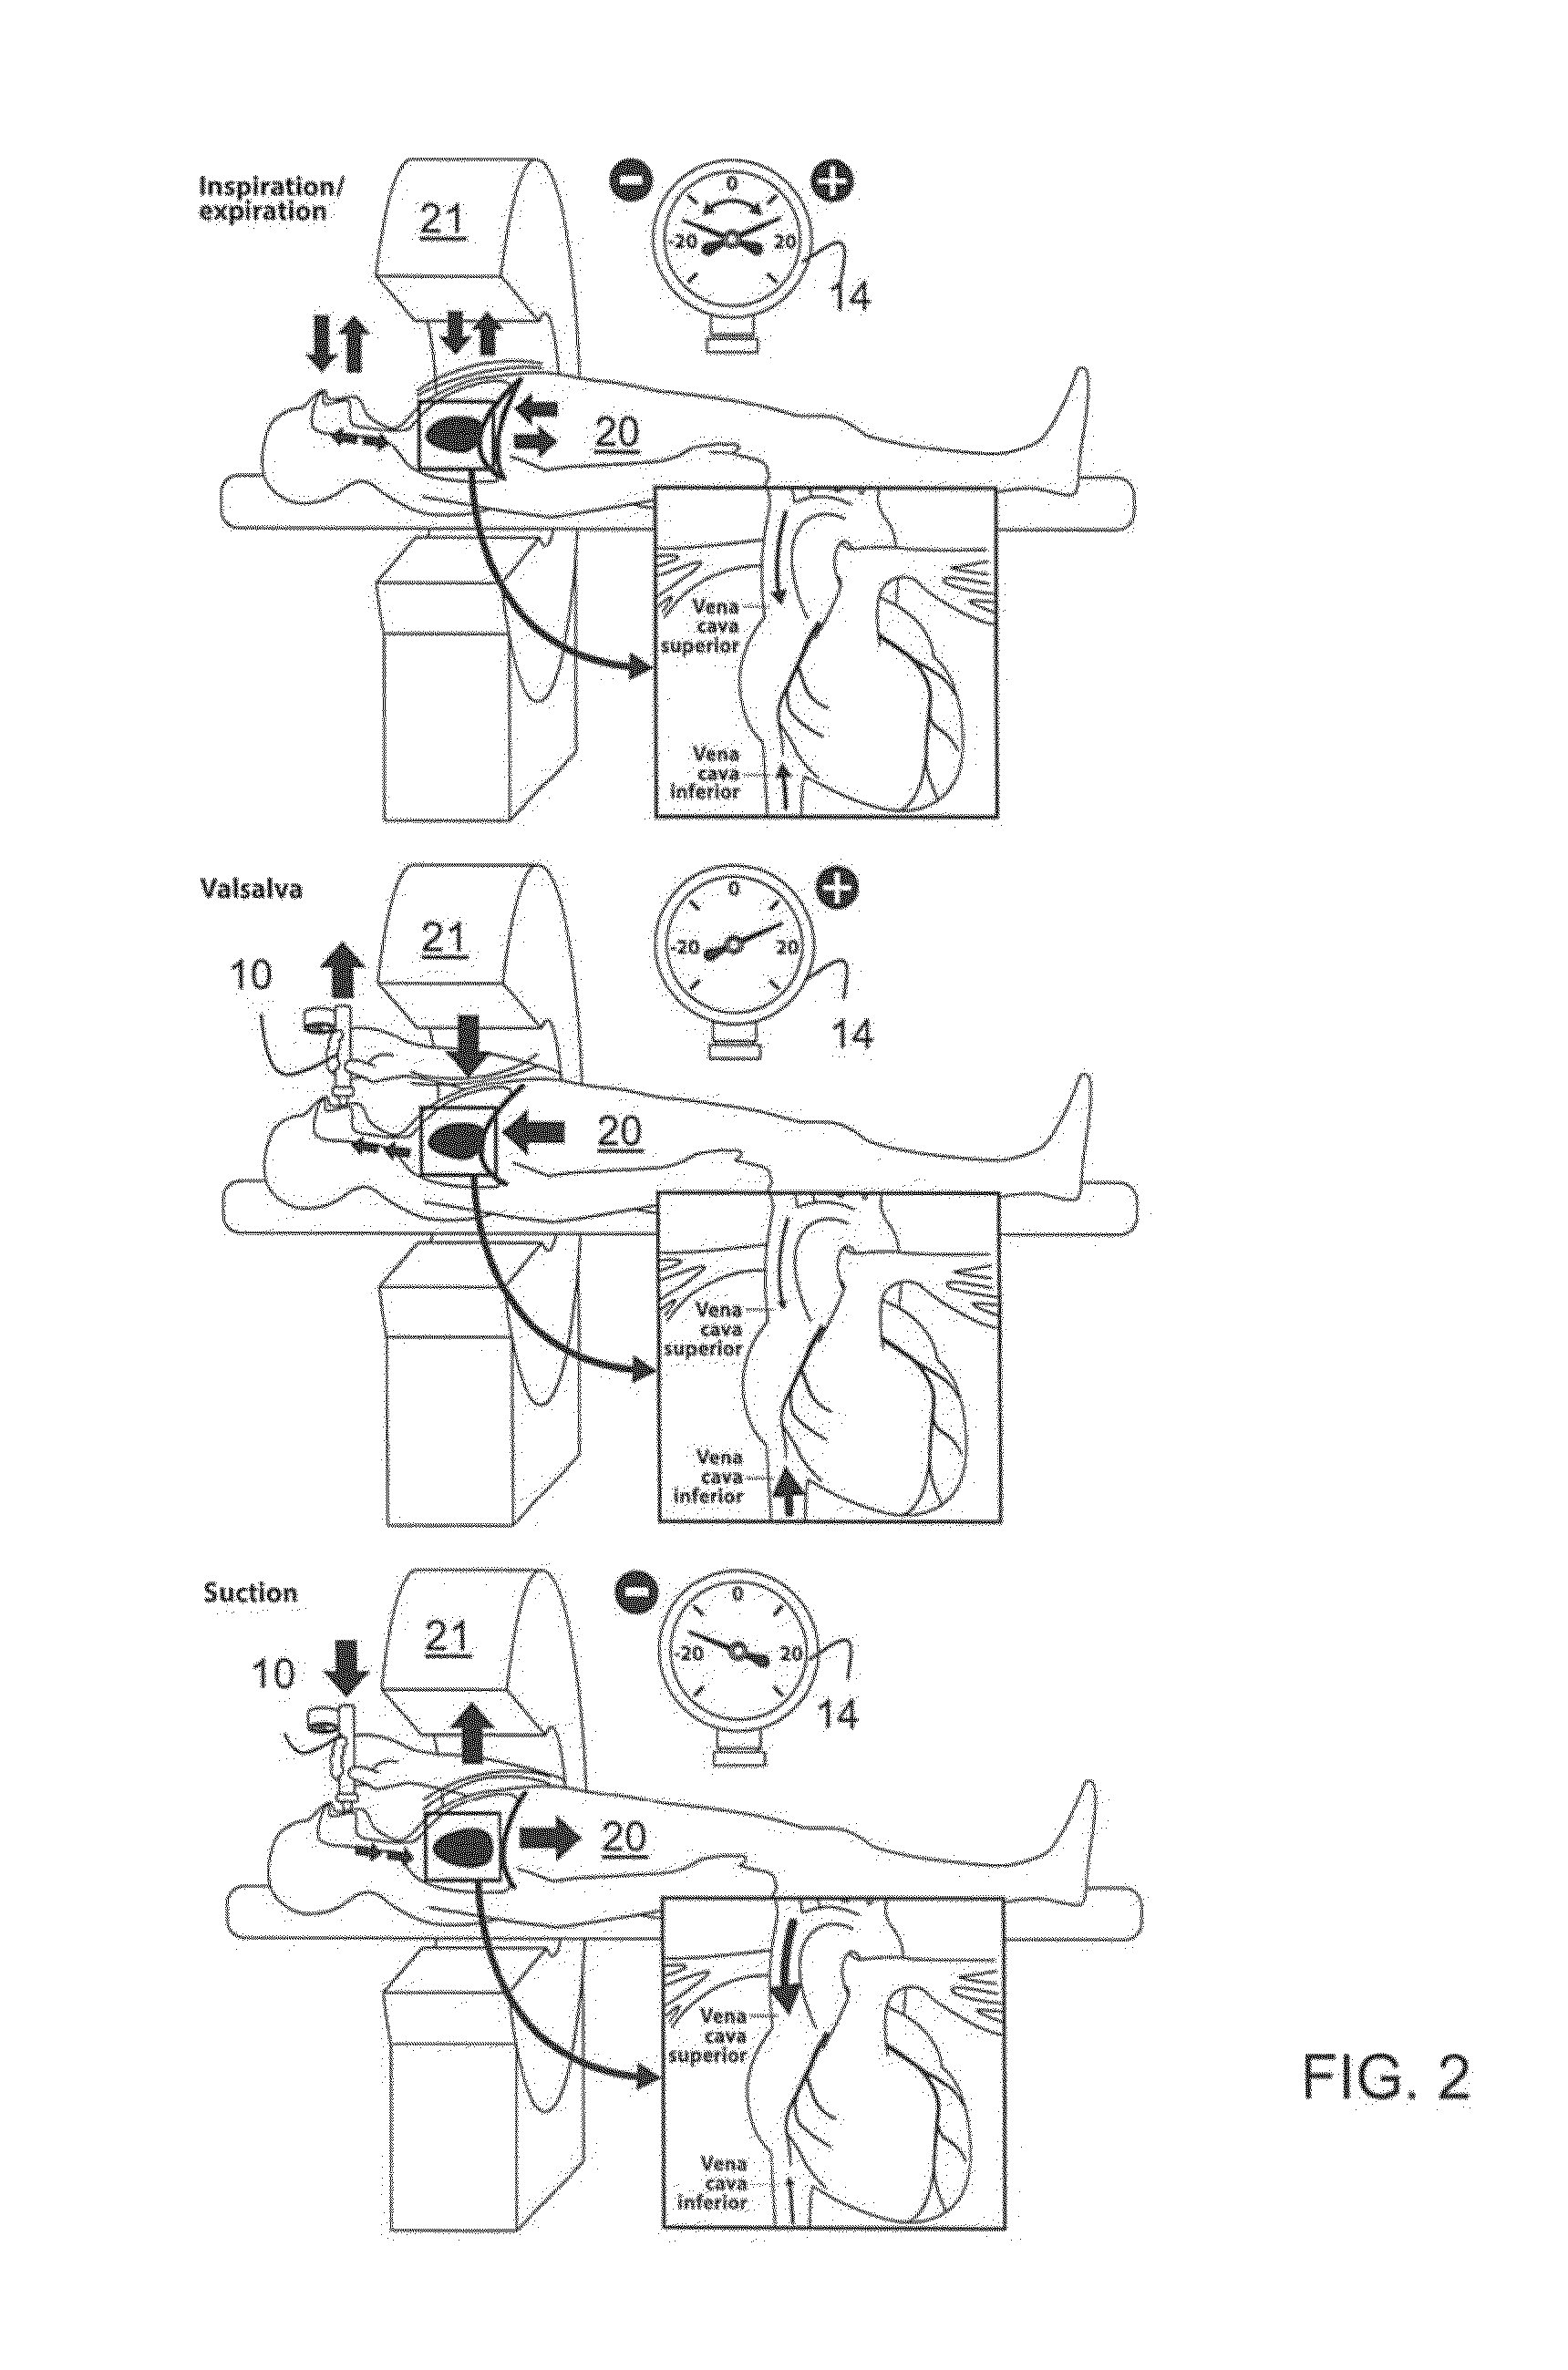 Blood flow control system and methods for in-vivo imaging and other applications